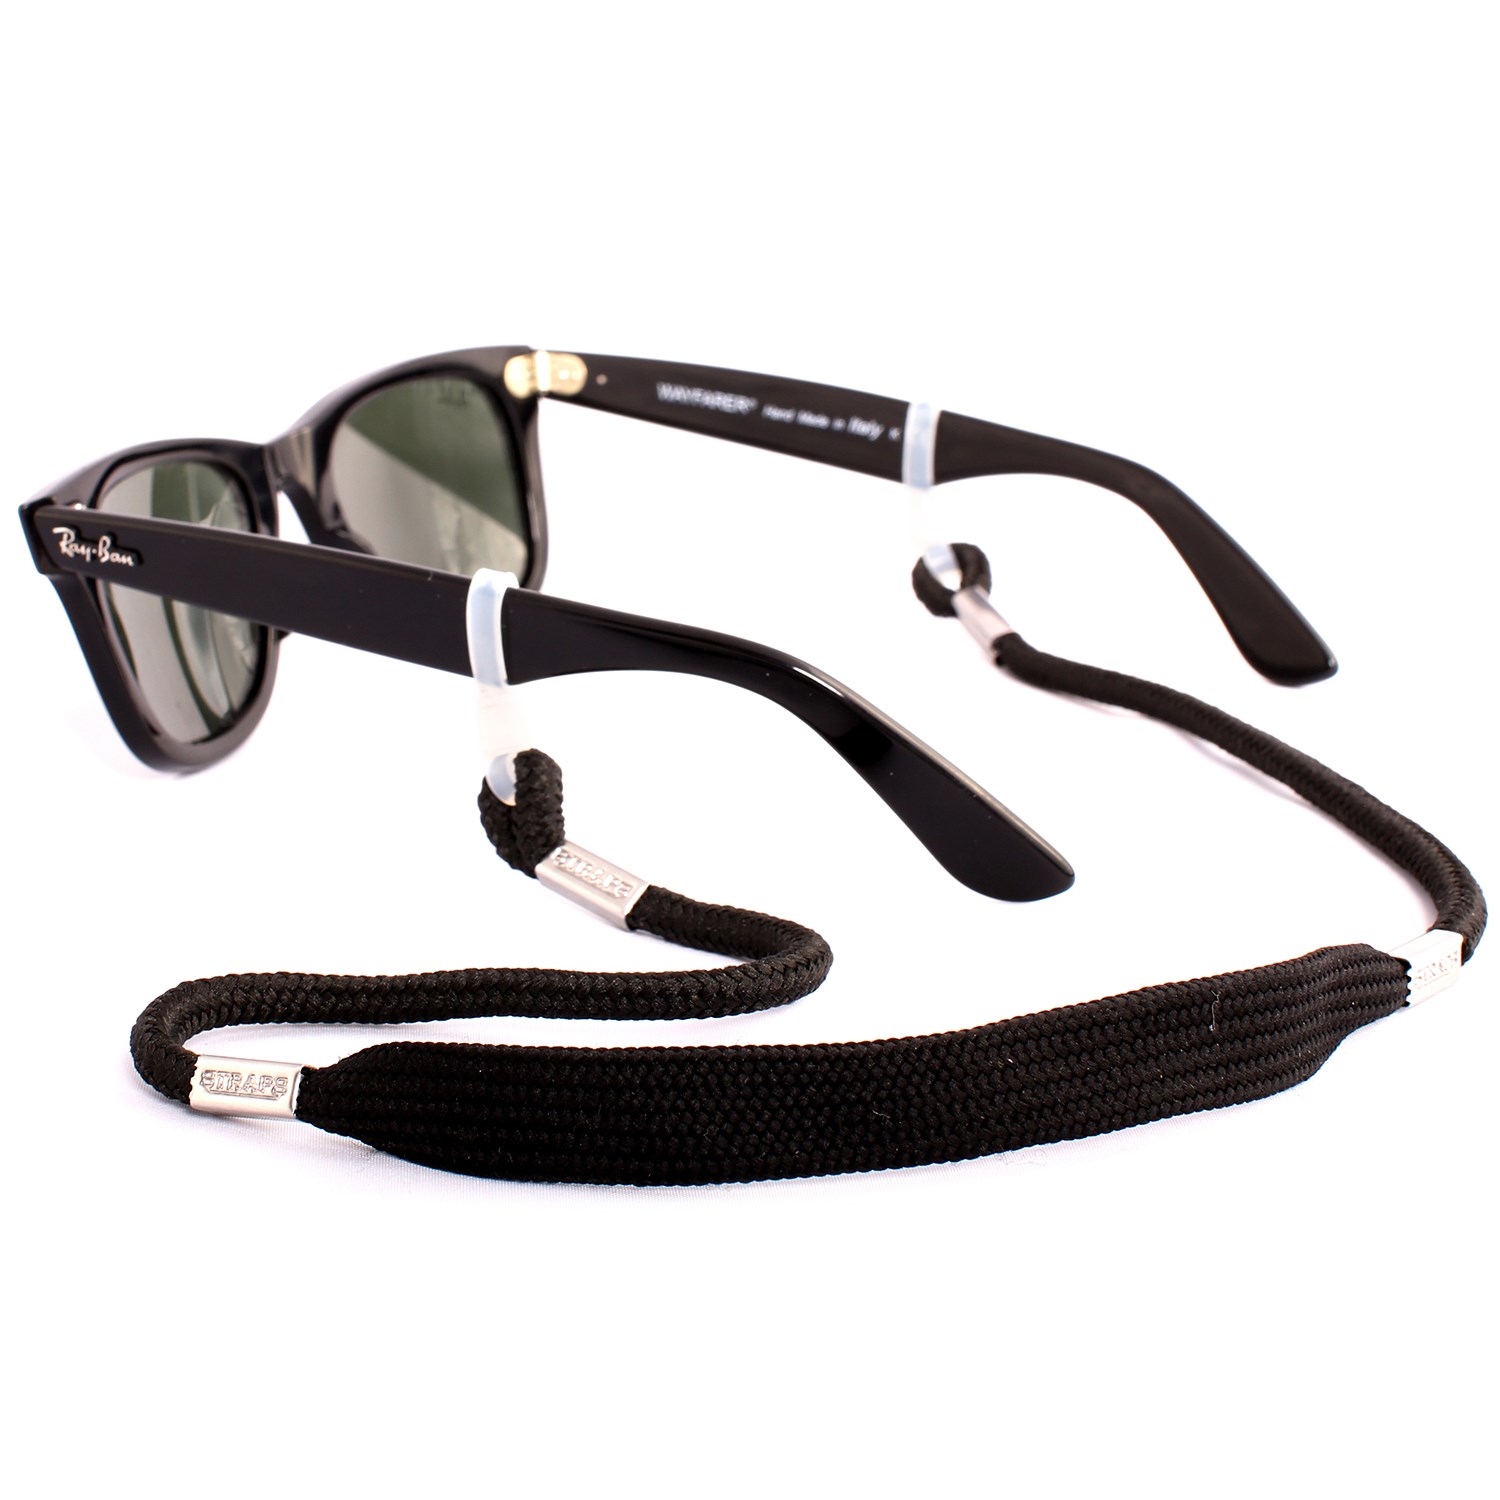 Latest Ray-Ban Accessories arrivals - Girls - 3 products | FASHIOLA.in